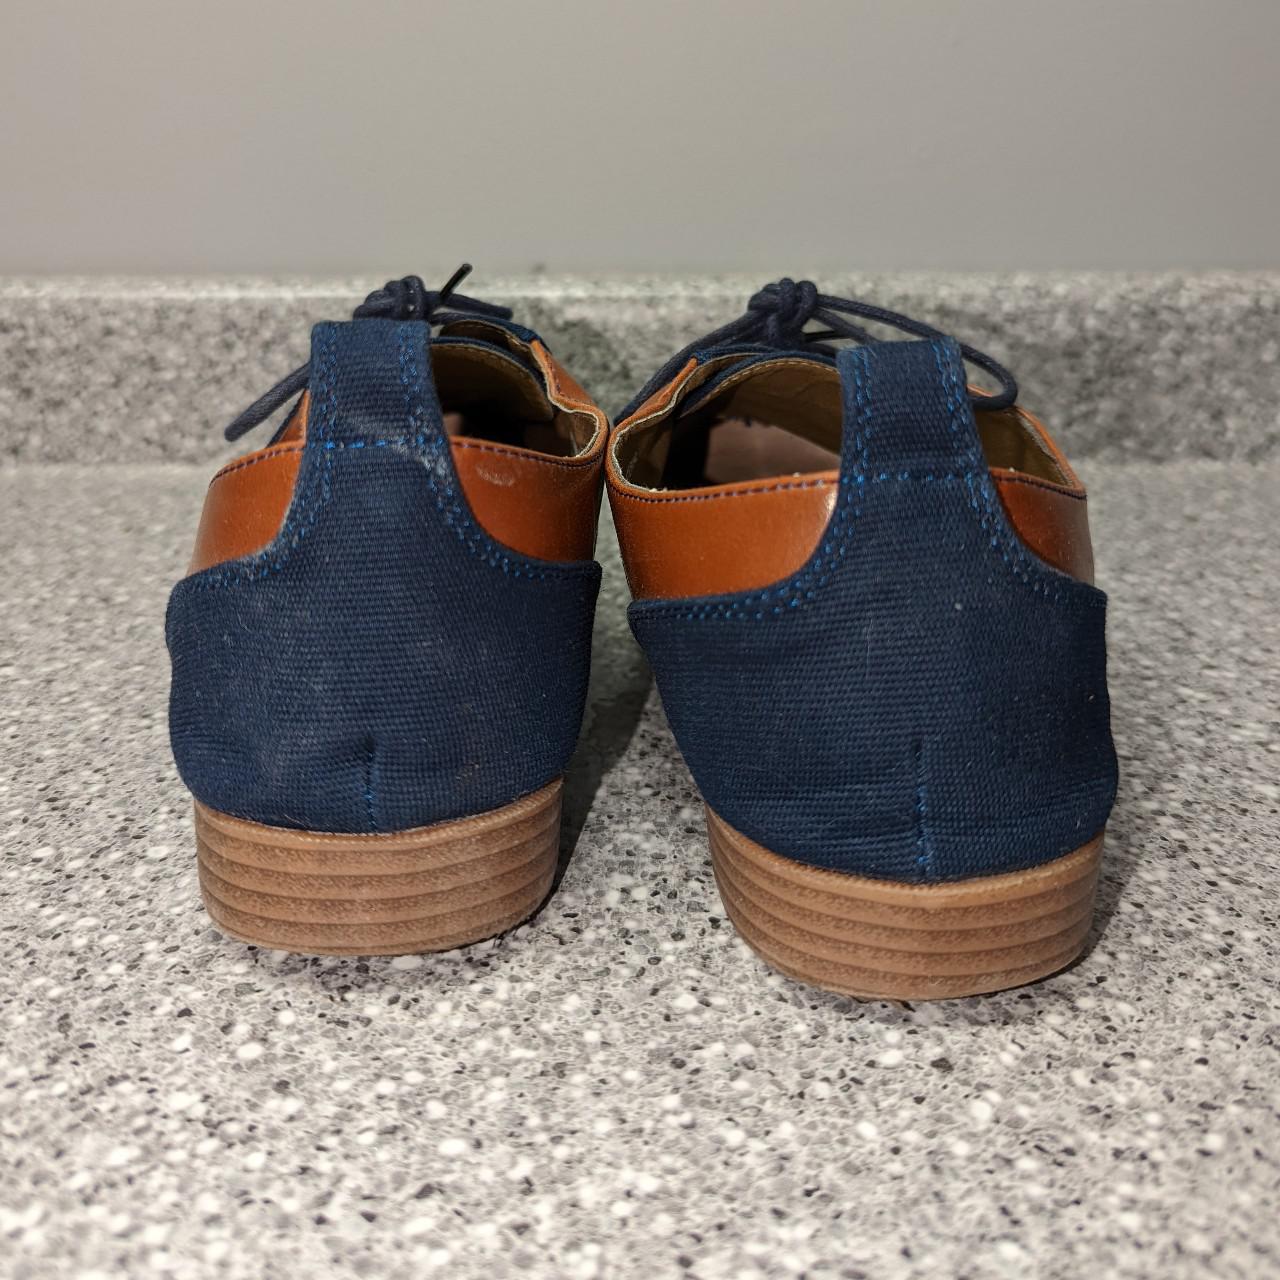 ModCloth Women's Navy and Brown Oxfords | Depop